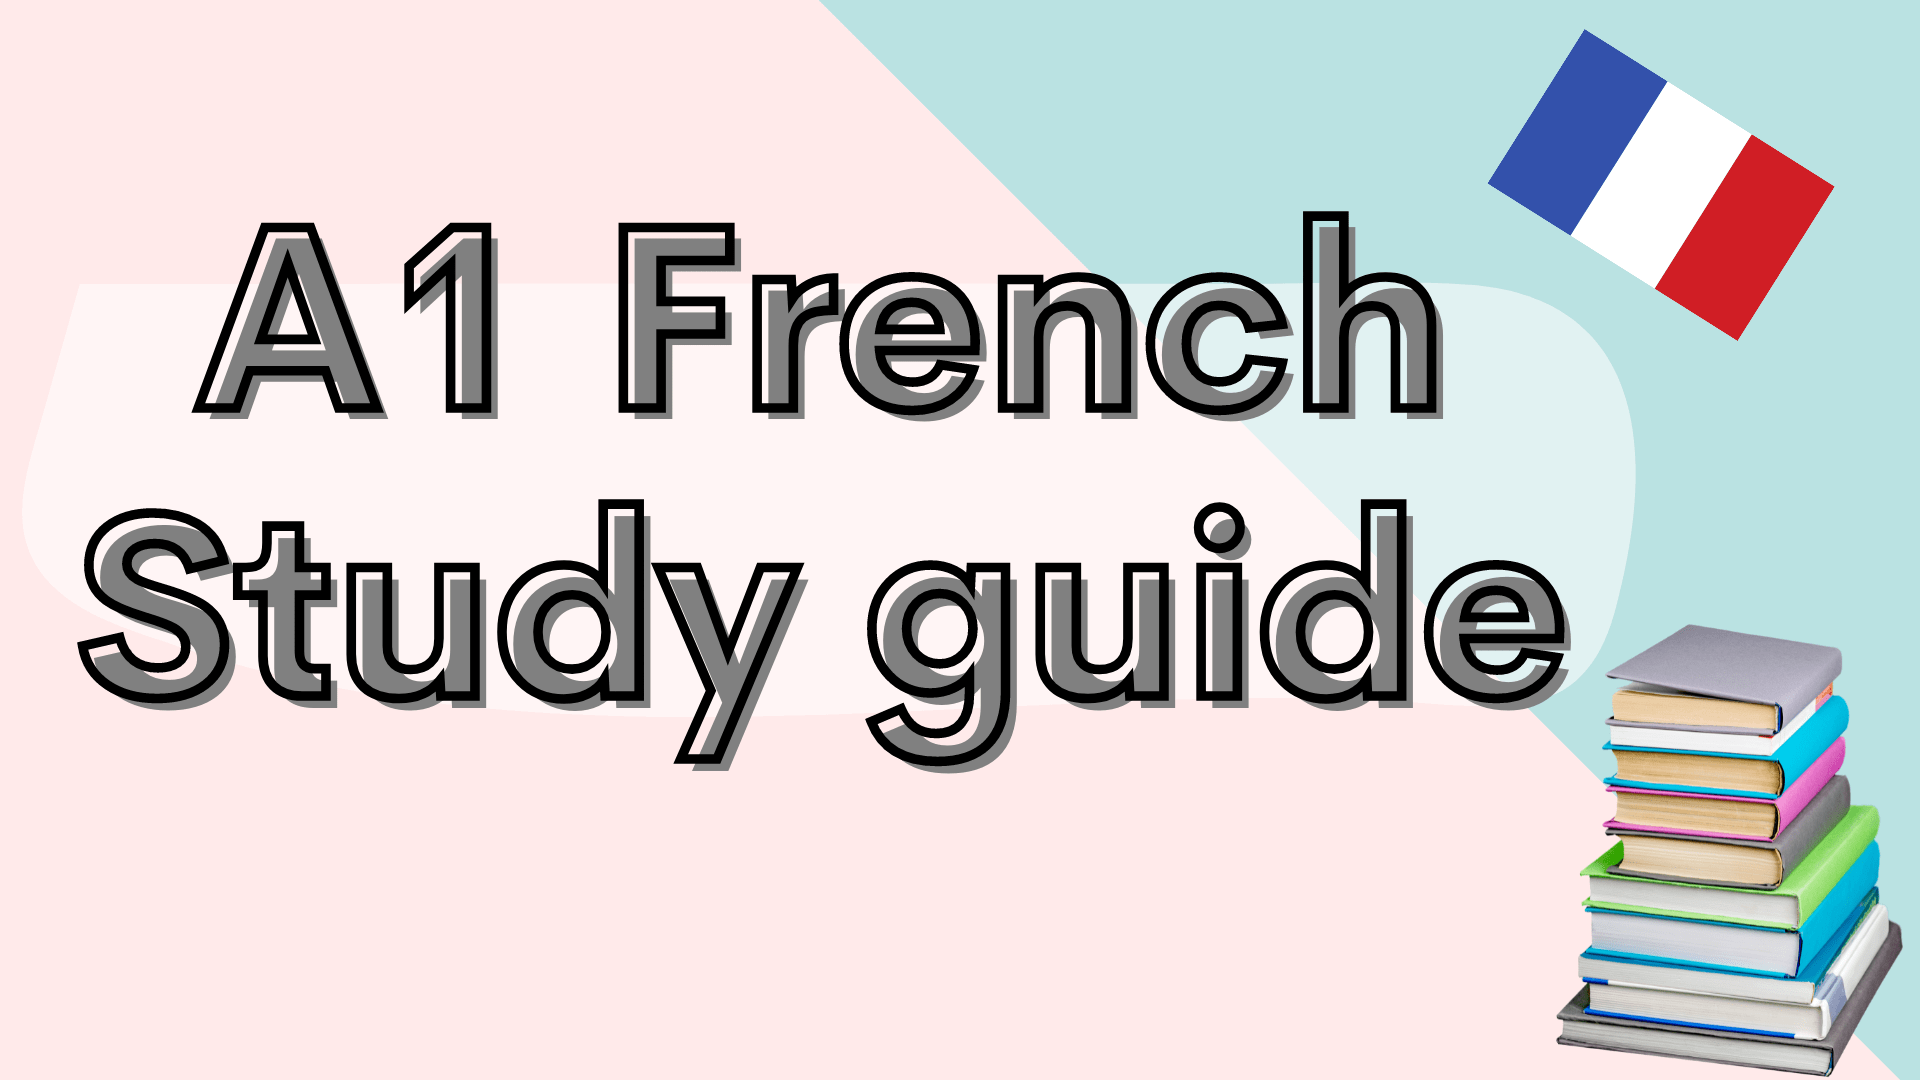 A1 French study guide